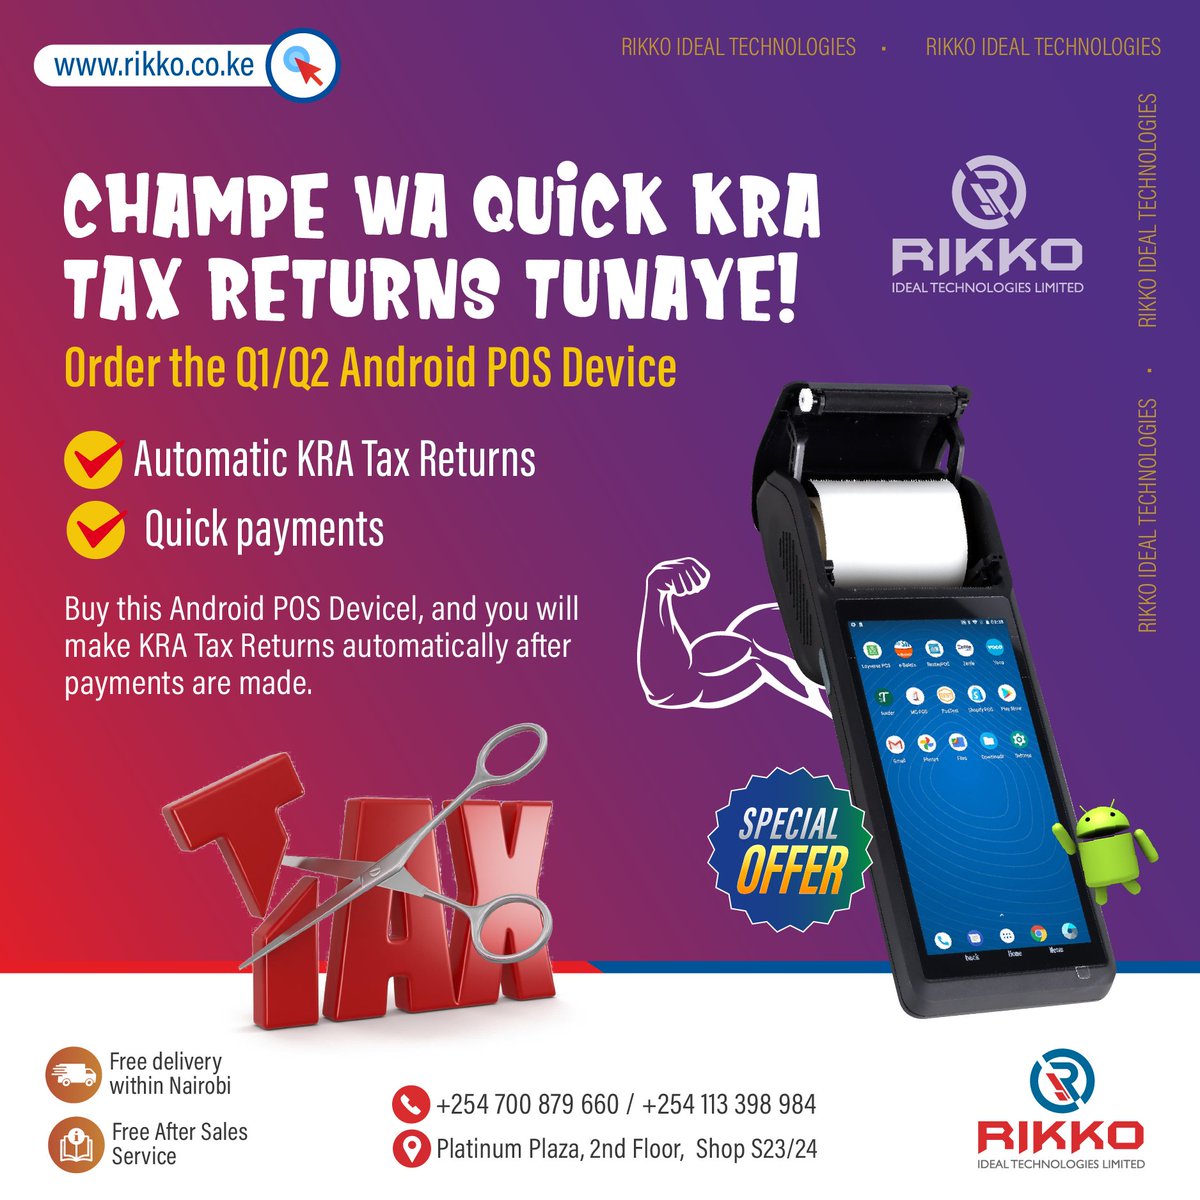 🚀 Goodbye to hassles! The new POS T3 Android eTiMS Ready POS device  submits payments directly to KRA 📱✅#TaxTechInnovation#FasterPayments #SimplifyBusiness 🌟💼